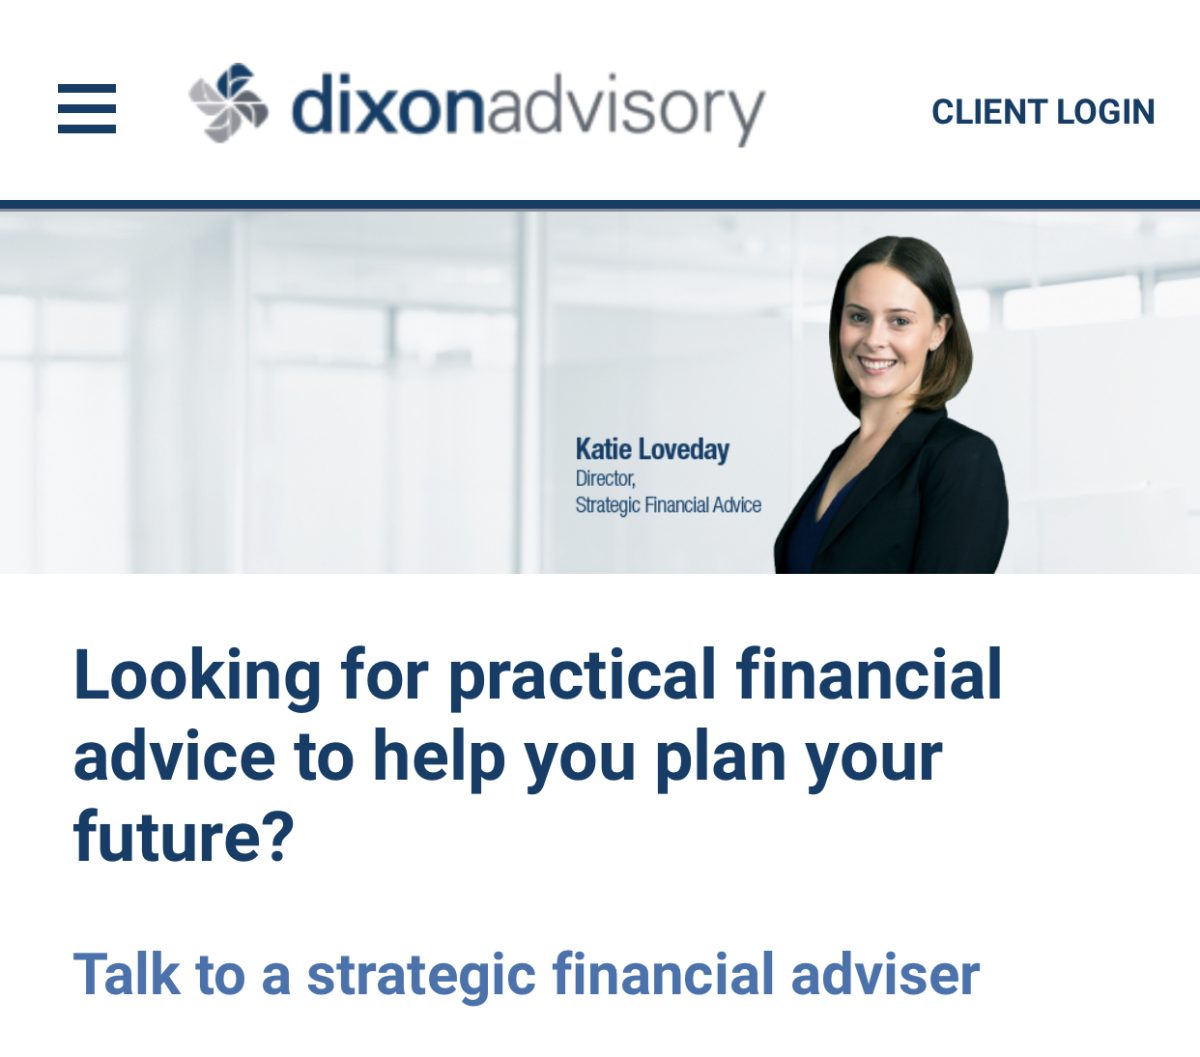 Dixon Advisory shows conflicts remain in Australian advice